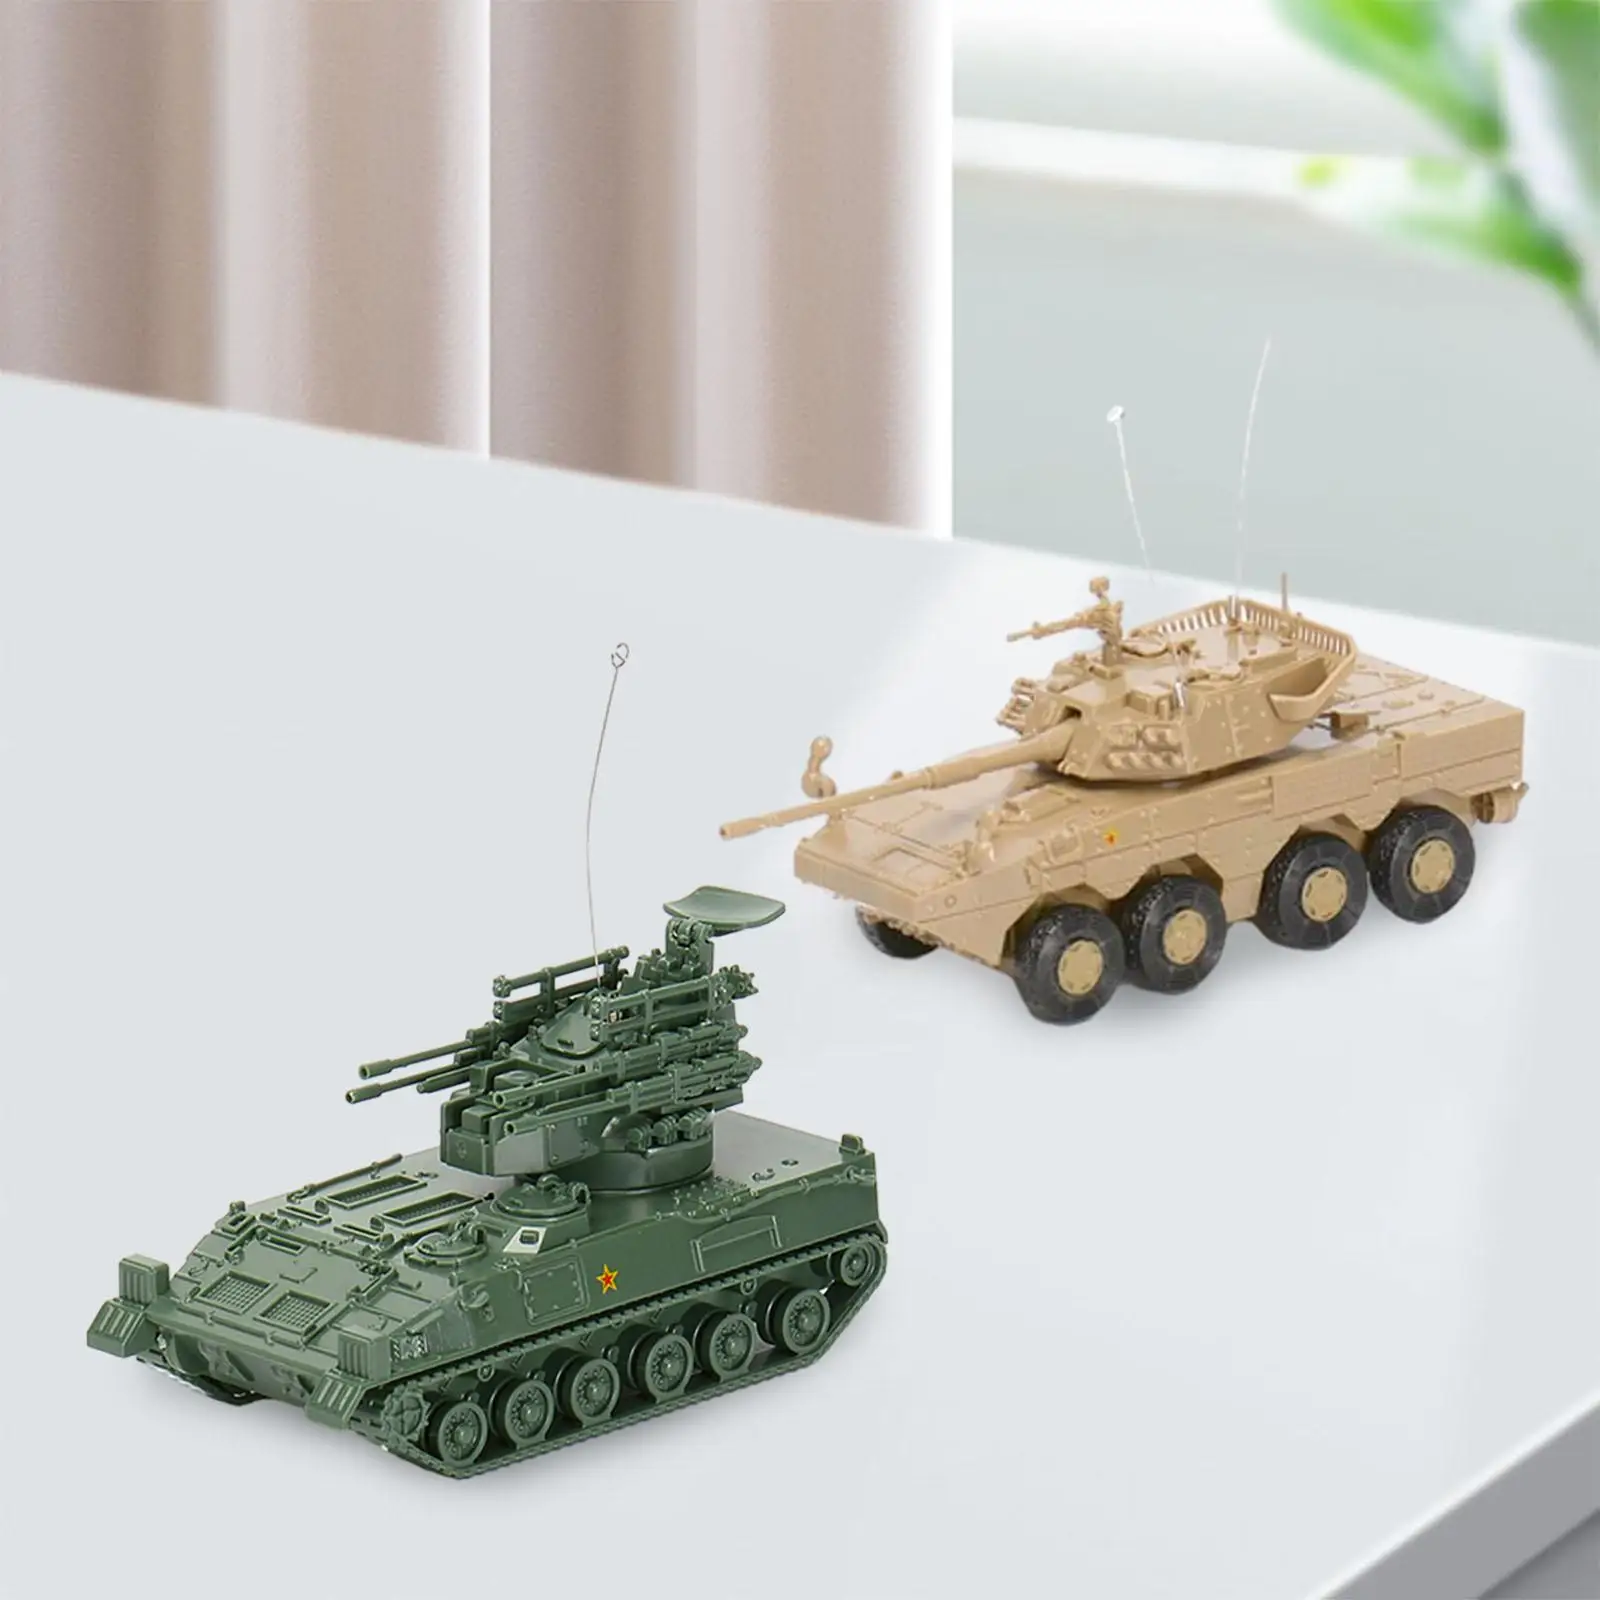 2 Pieces 1/72 Tank Model Vehicle Tank Model Toy Educational Toys Collectible for Kids Party Favors Adults Boy Table Scene